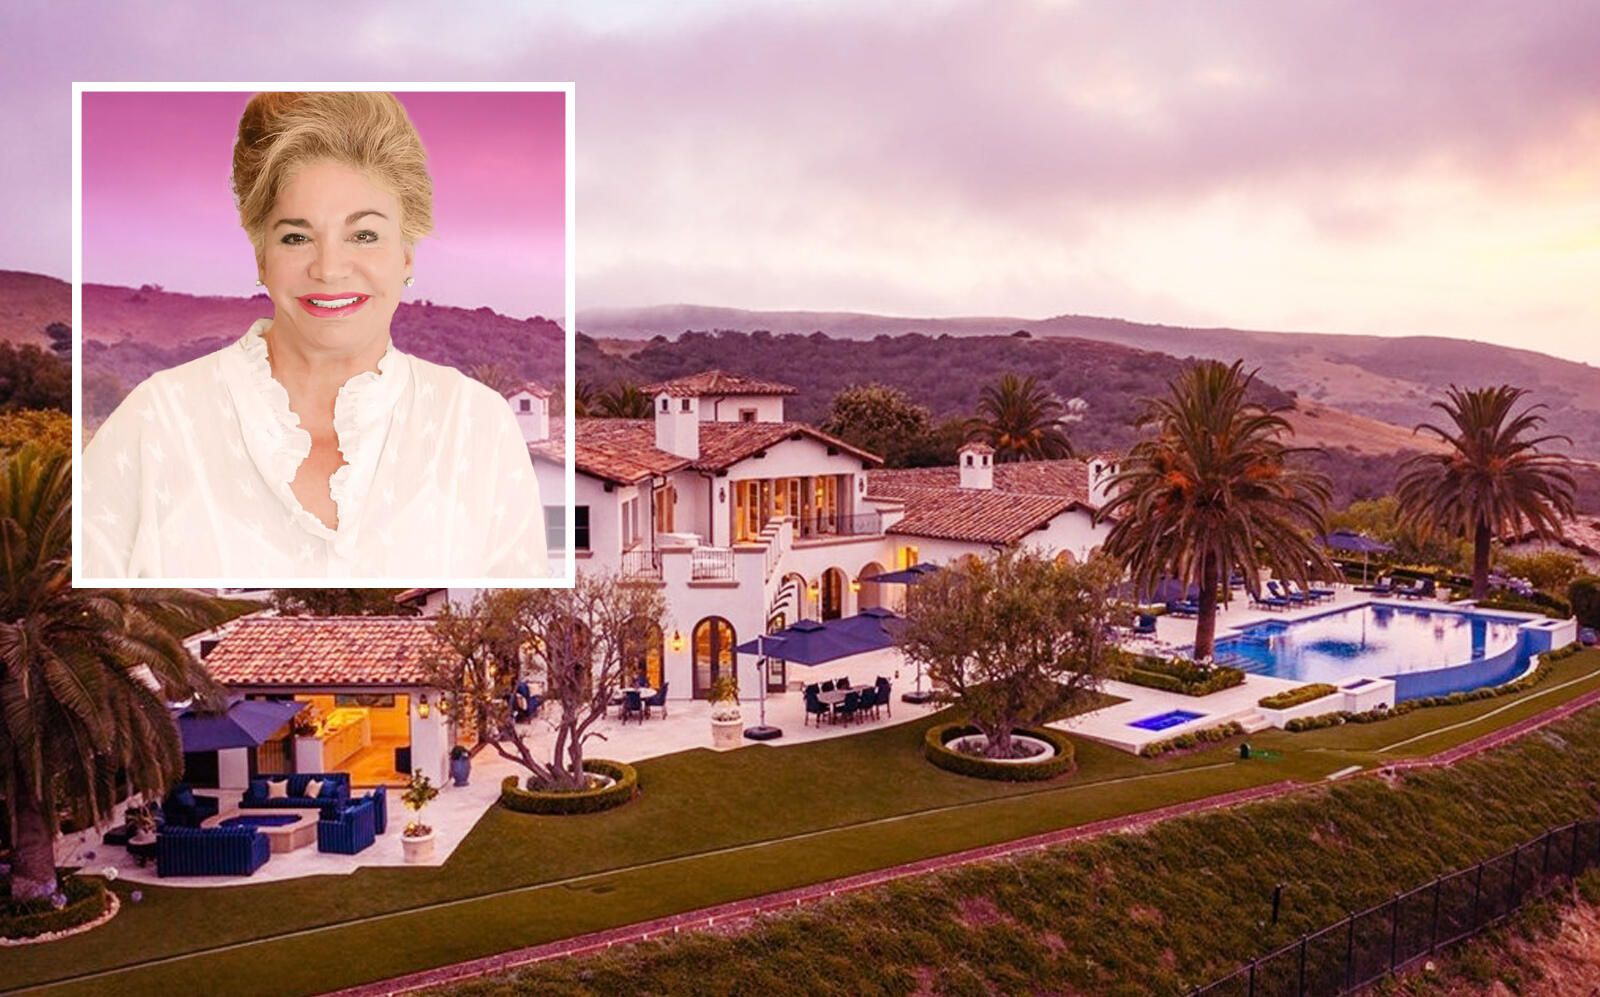 SeneGence founder Joni Rogers-Kante bought the home in 2017 (Coldwell Banker Realty, SeneGence)